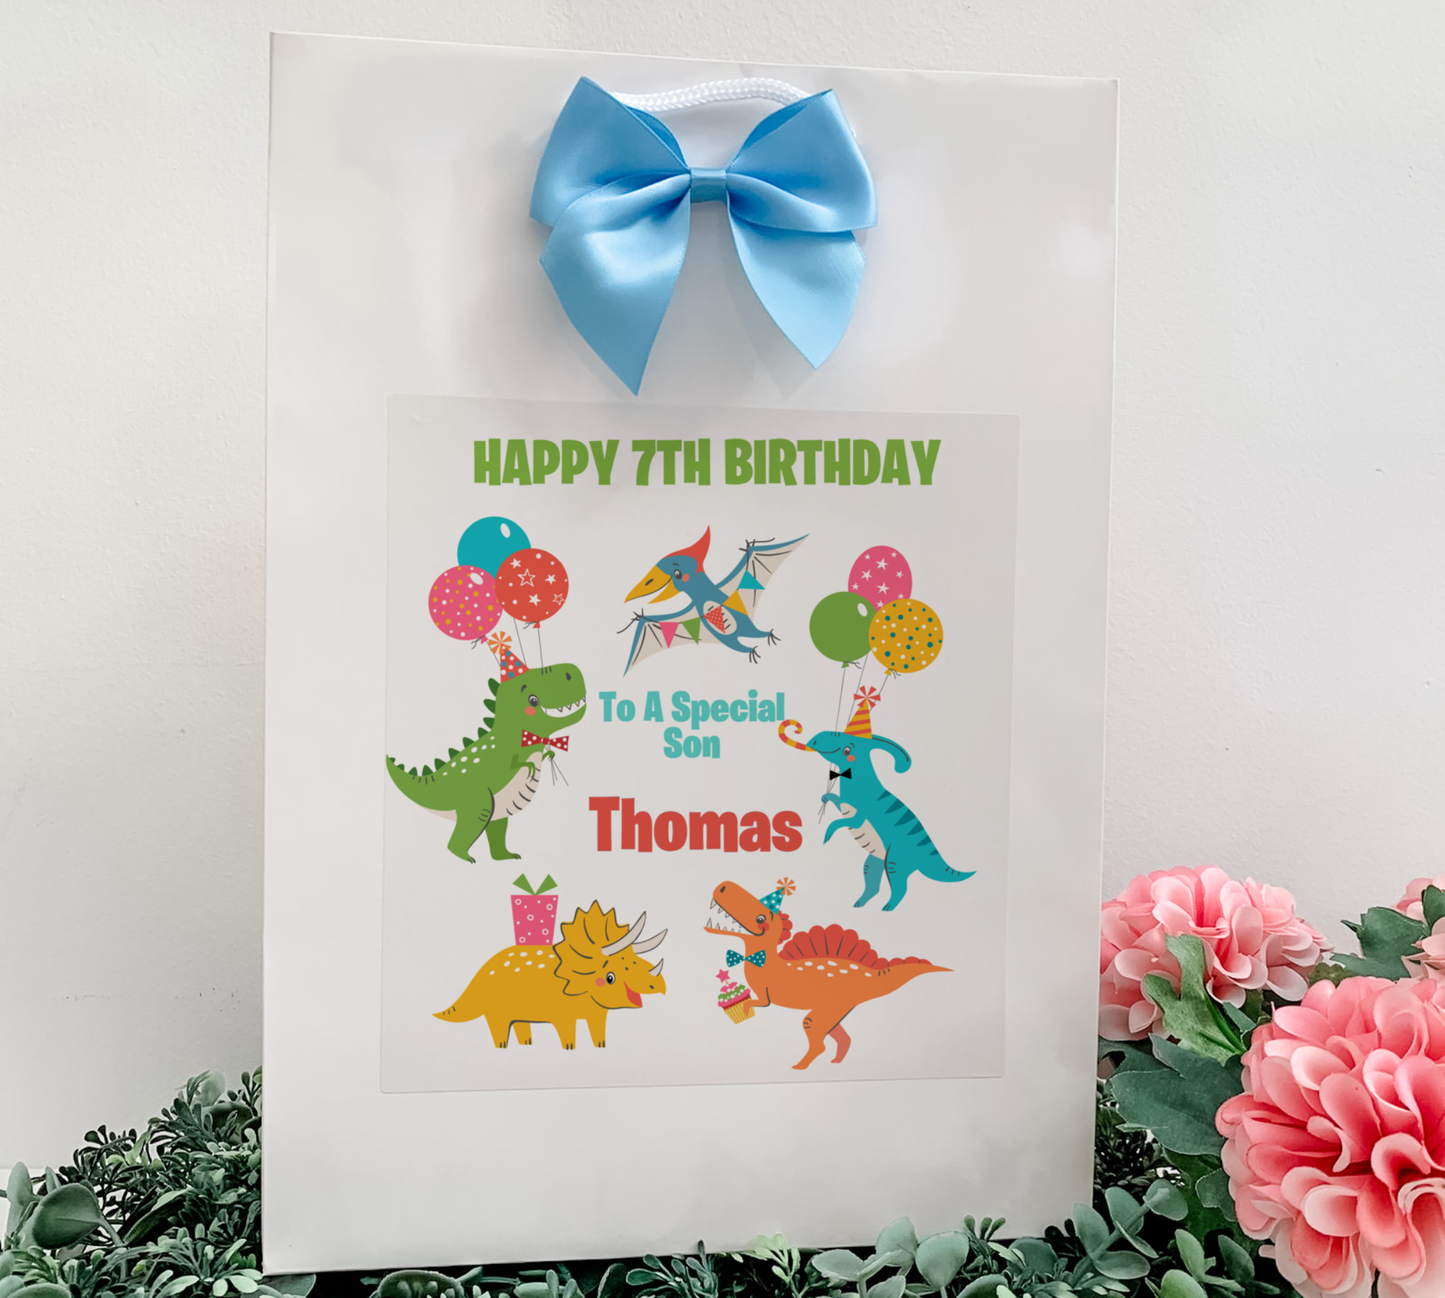 a picture of a birthday card with dinosaurs and balloons